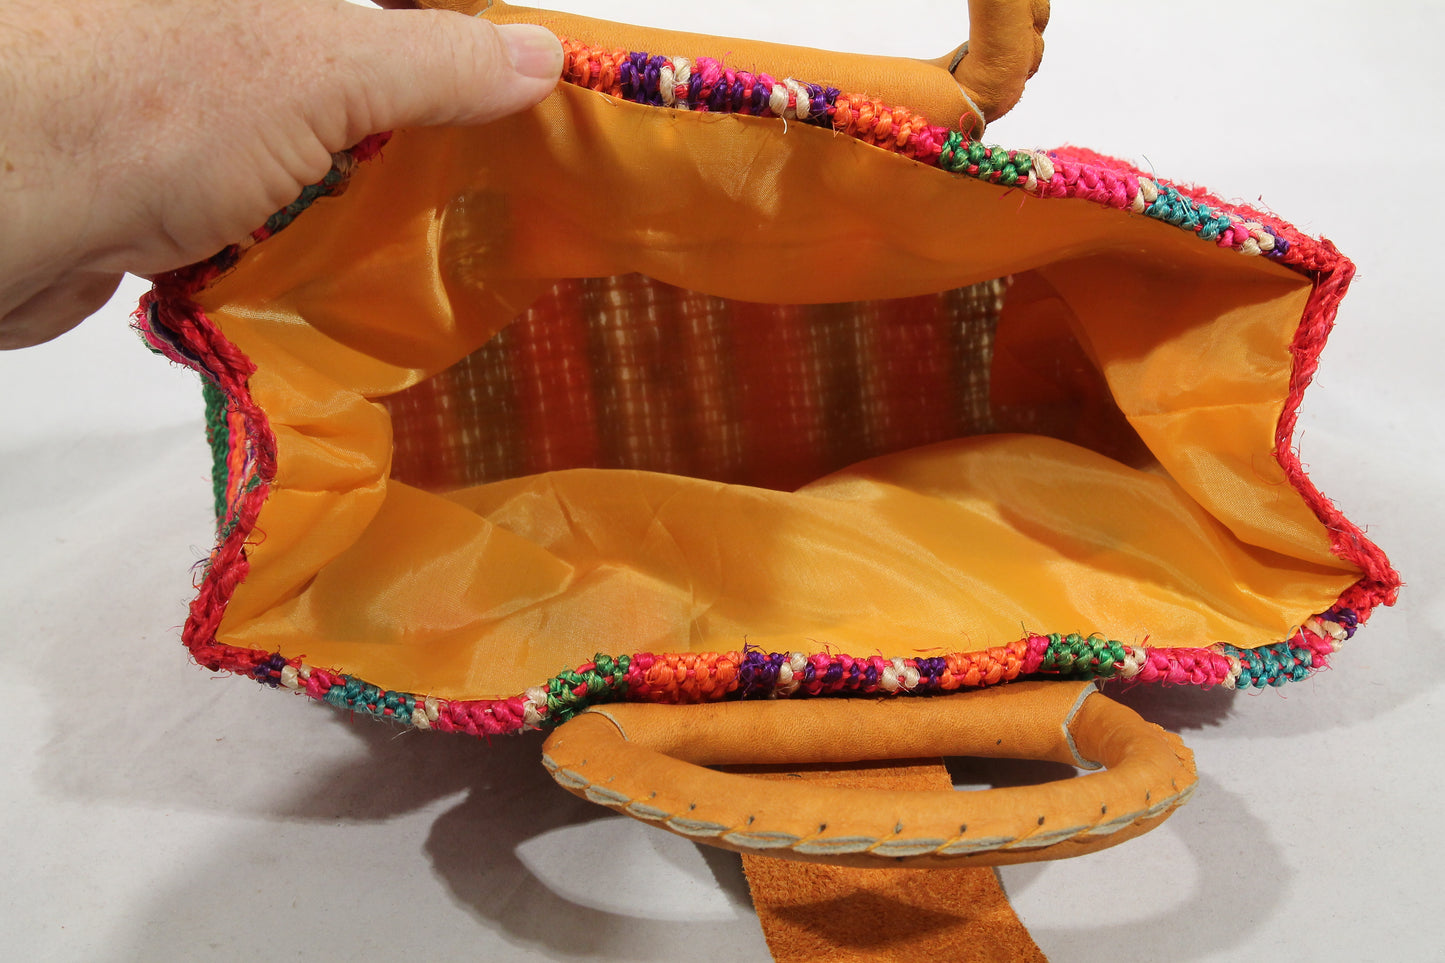 Purse/Bag/Tote Hand made Mexican Ixtle (cactus fiber) Lined Stripes #1